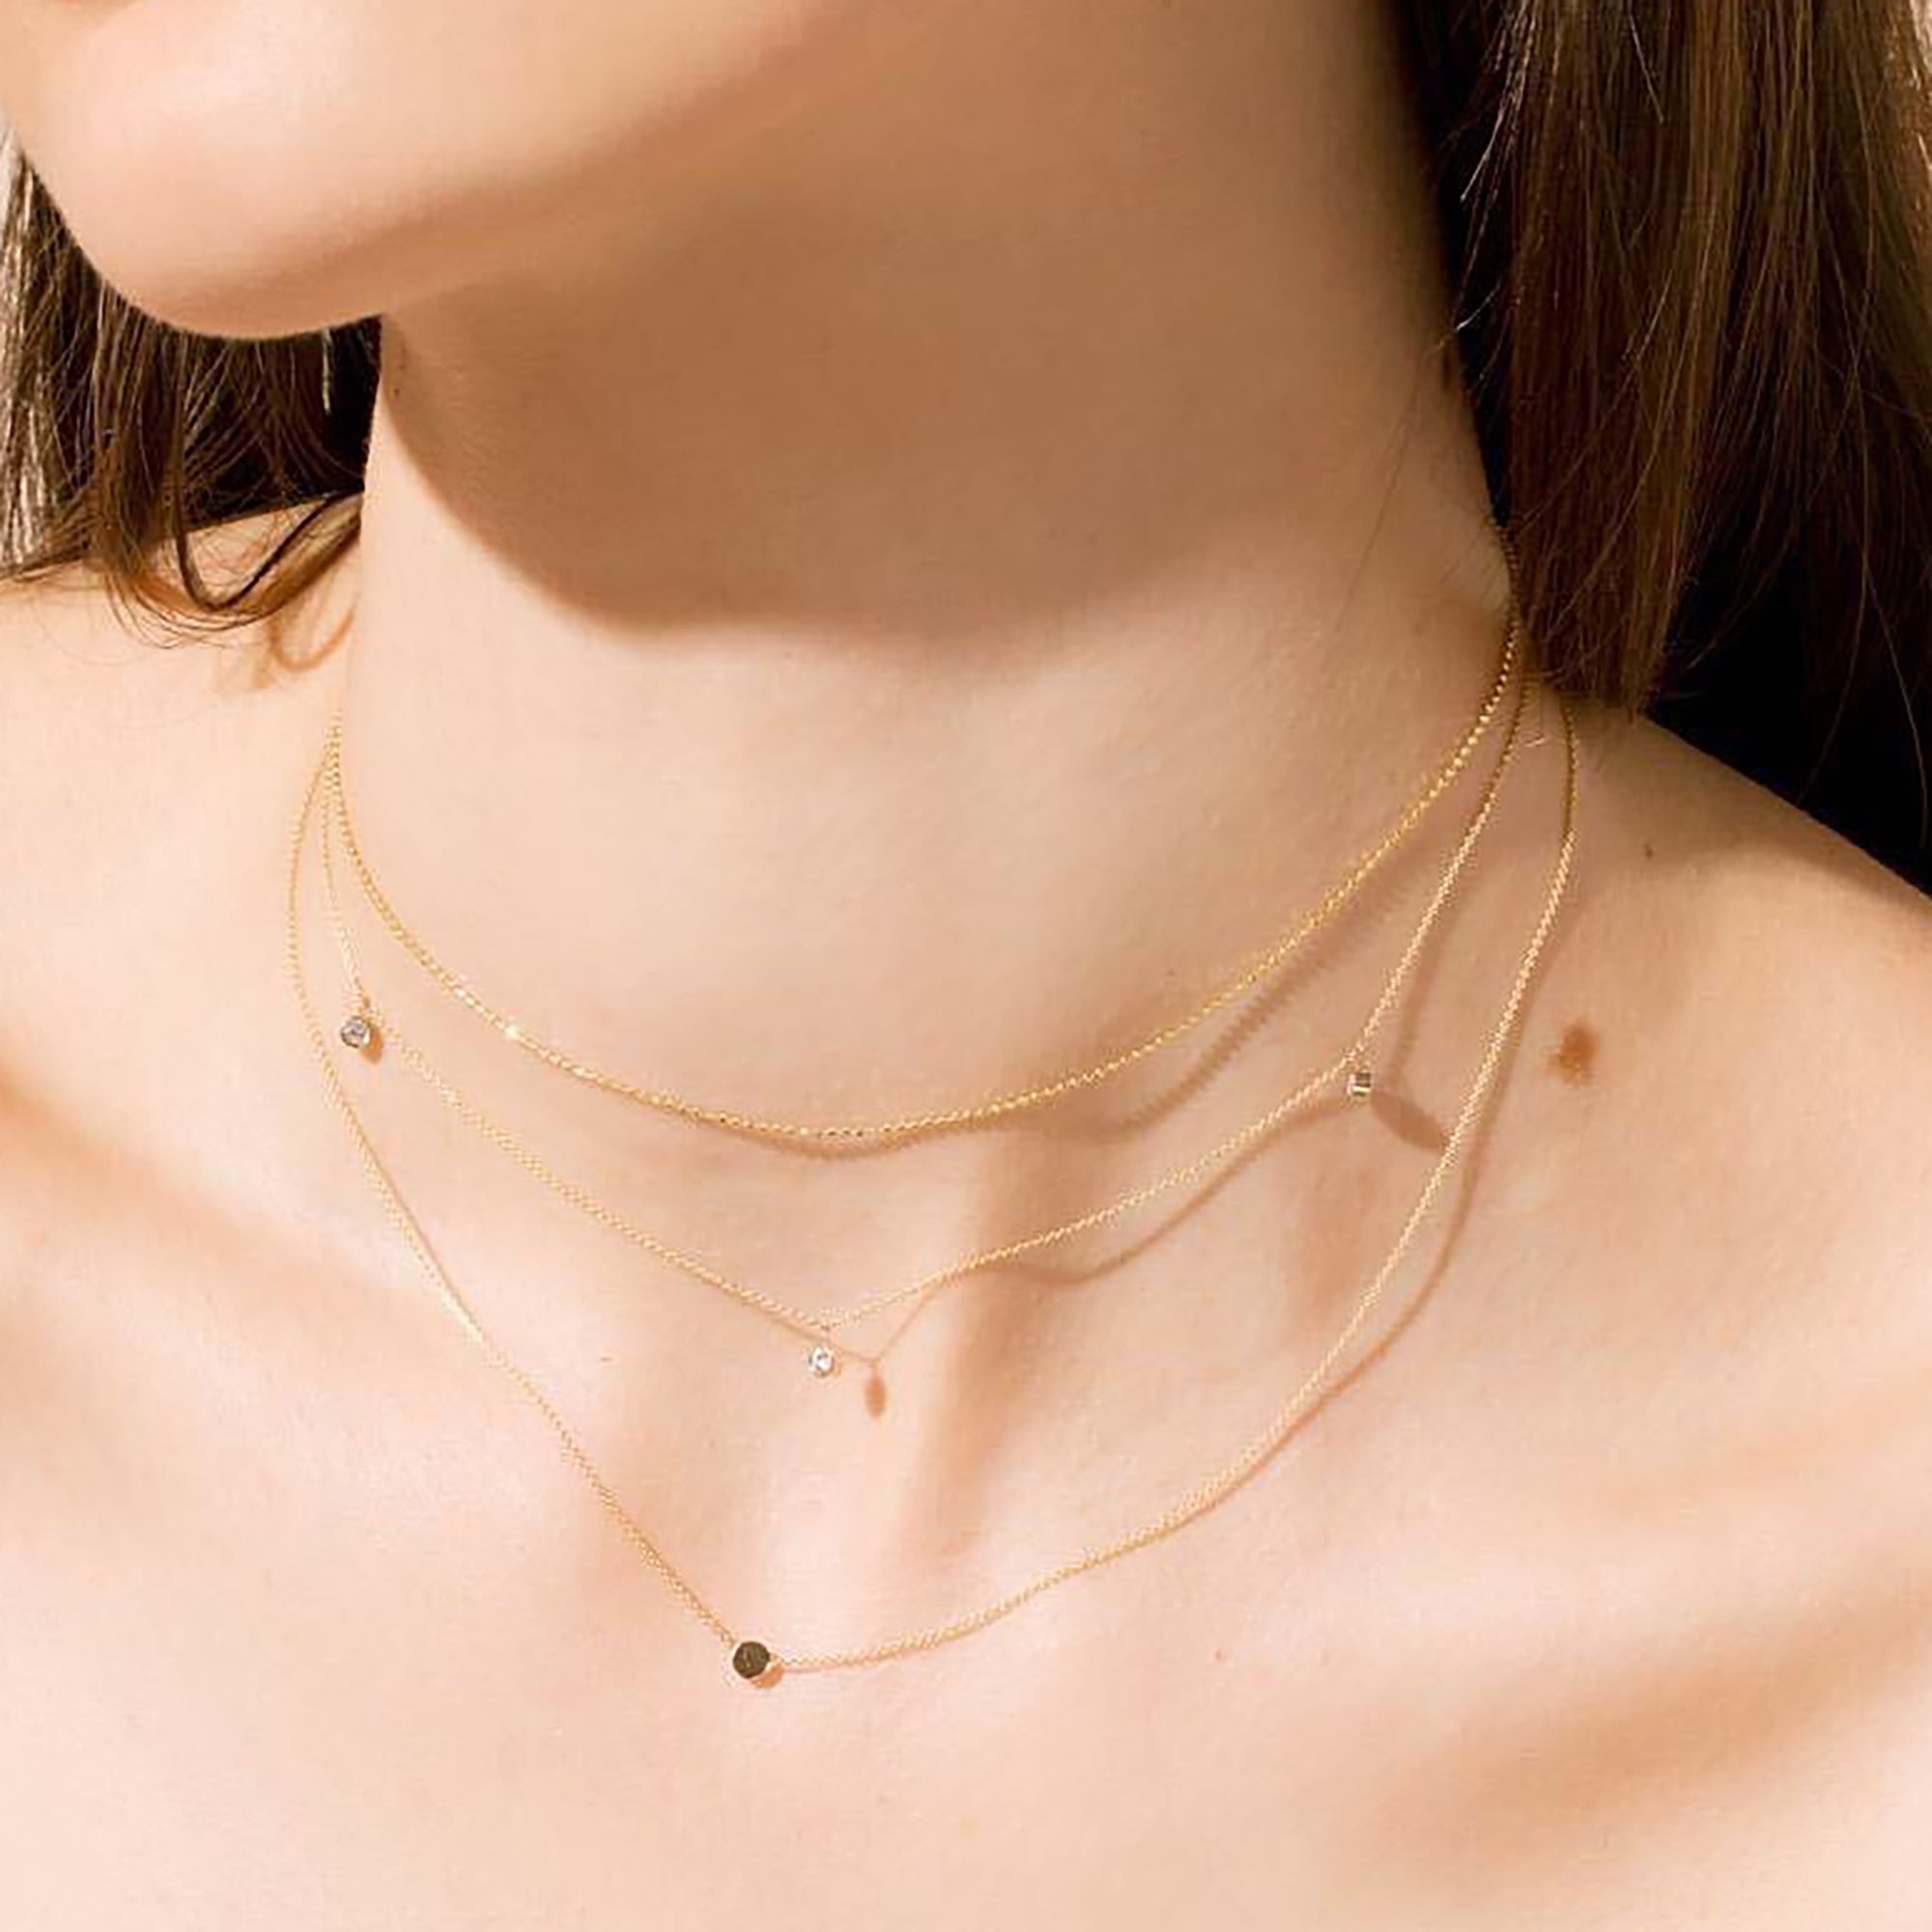 14K Gold Plated Flat O Shape Chain Long and Short O Shape Chain Jewelry  Chains Necklace Chains Flat O Shape Chains for Crafting 